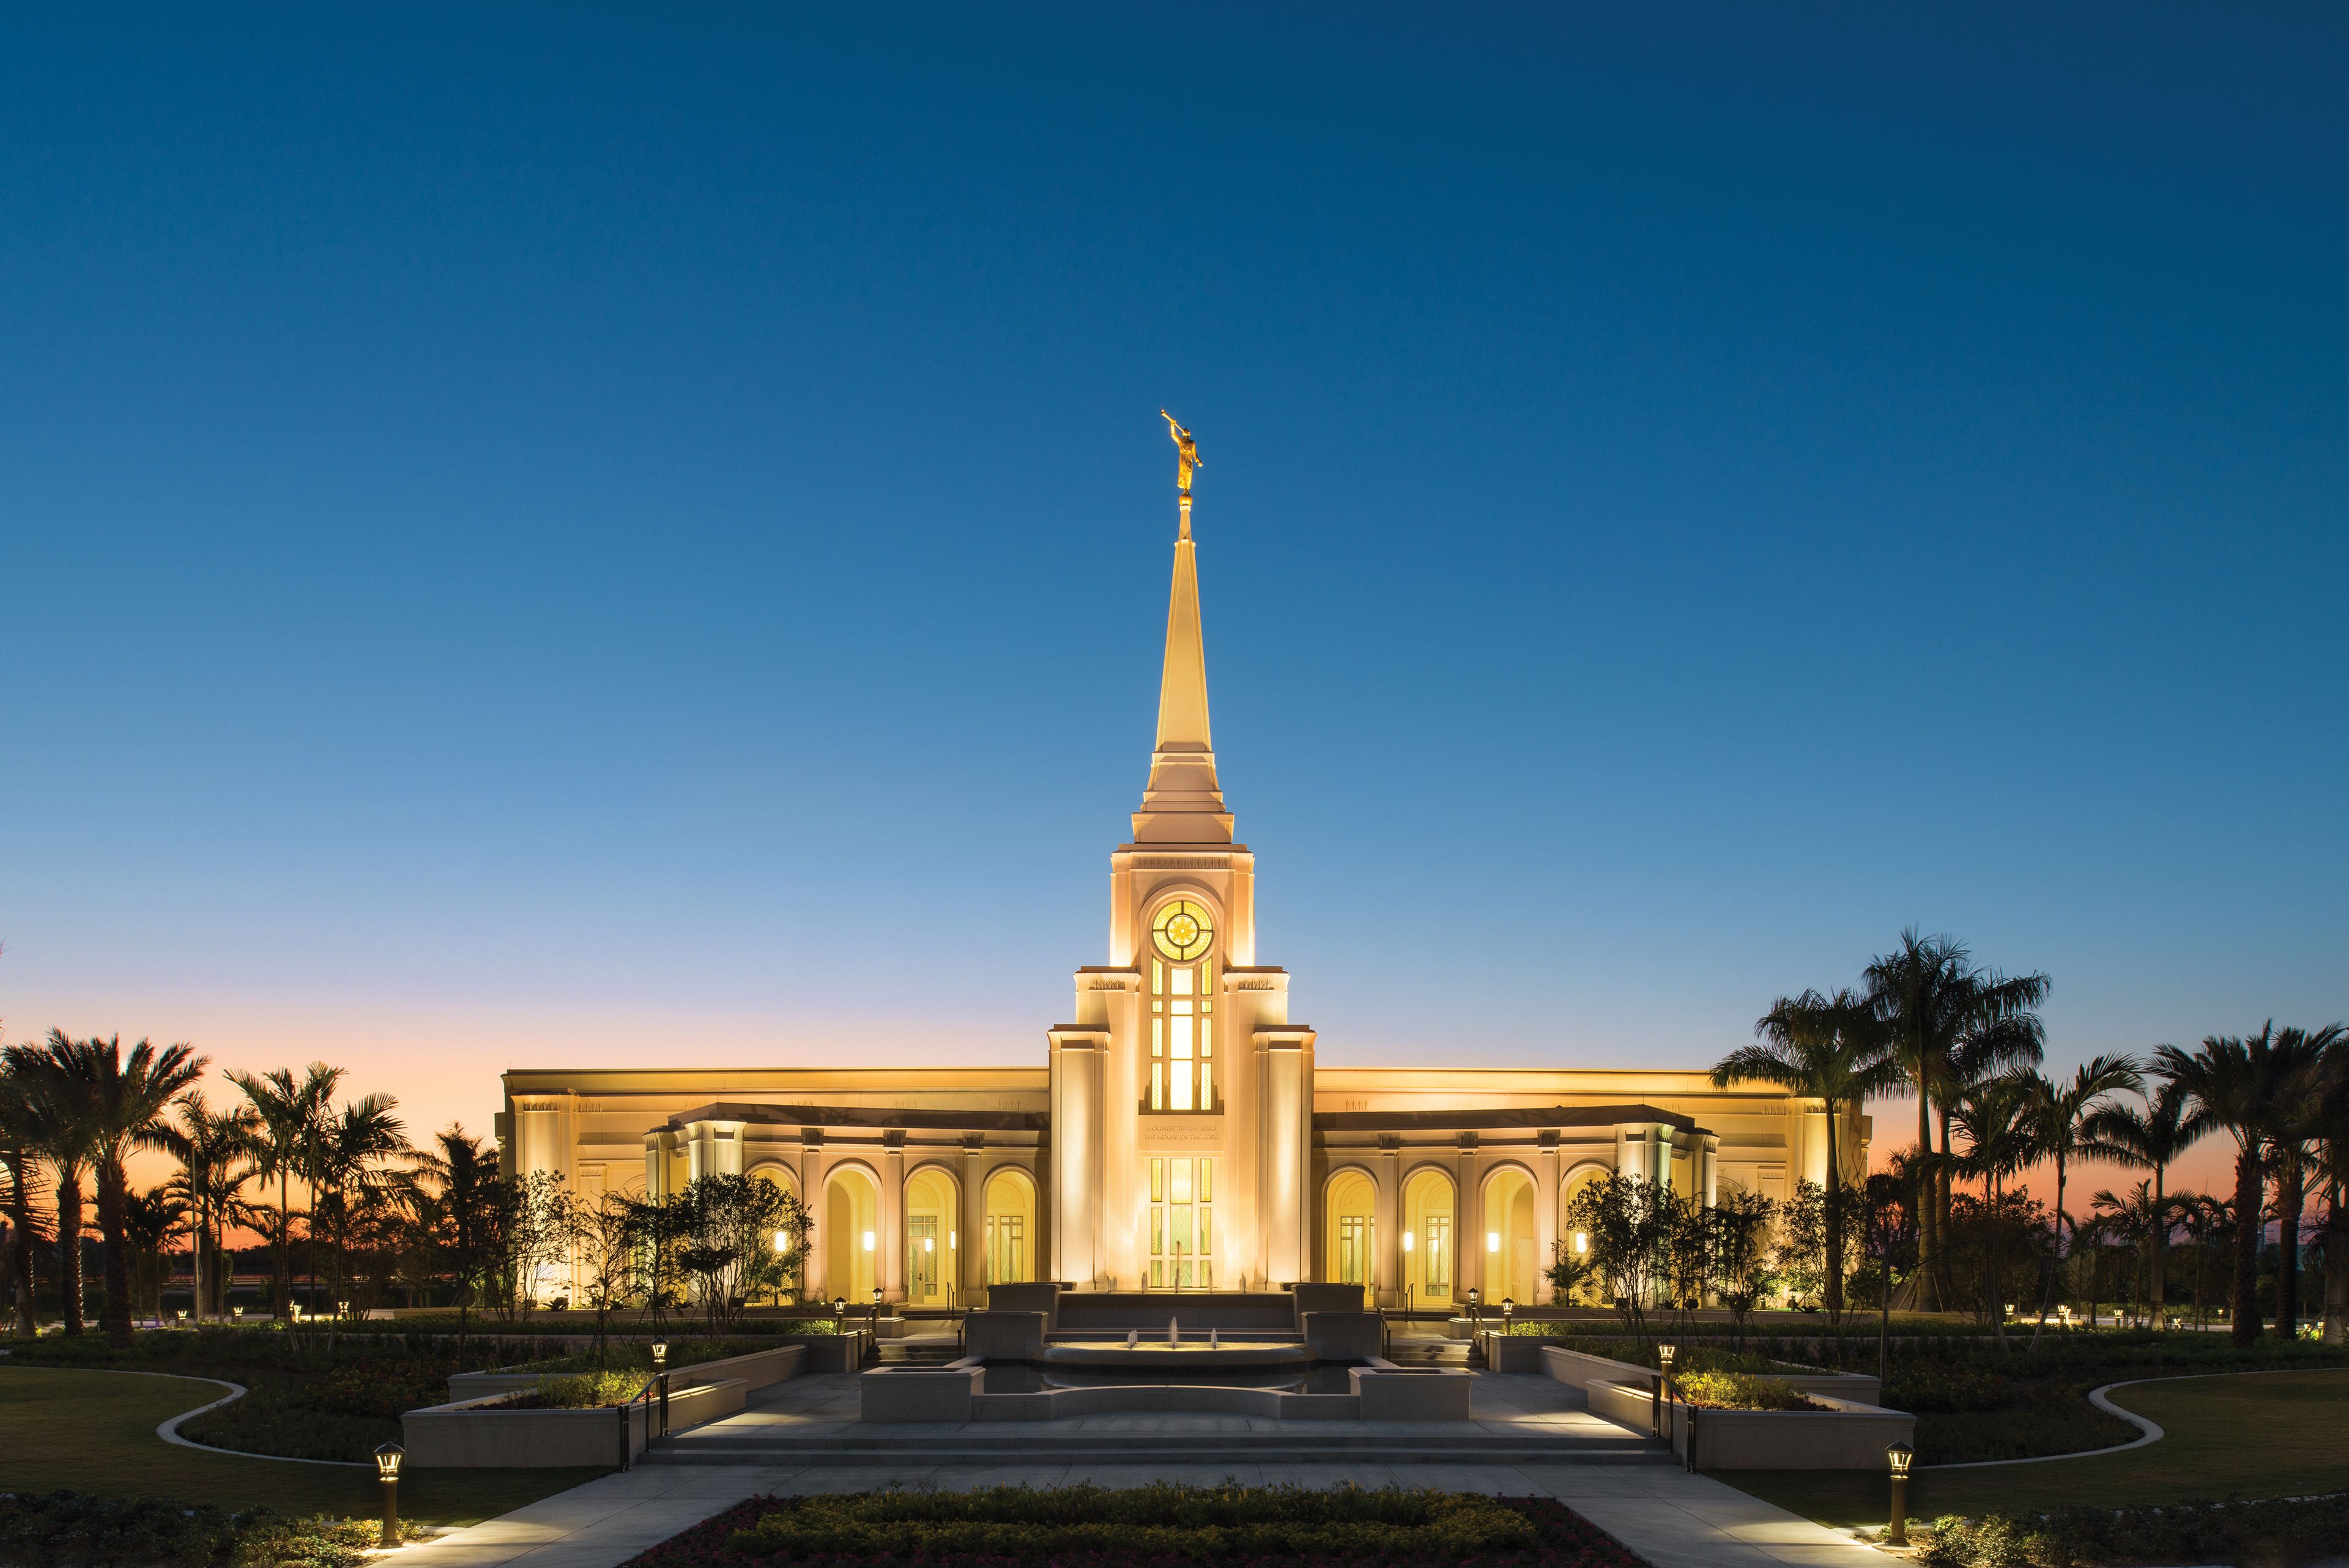 The Fort Lauderdale Florida Temple lit up at night.